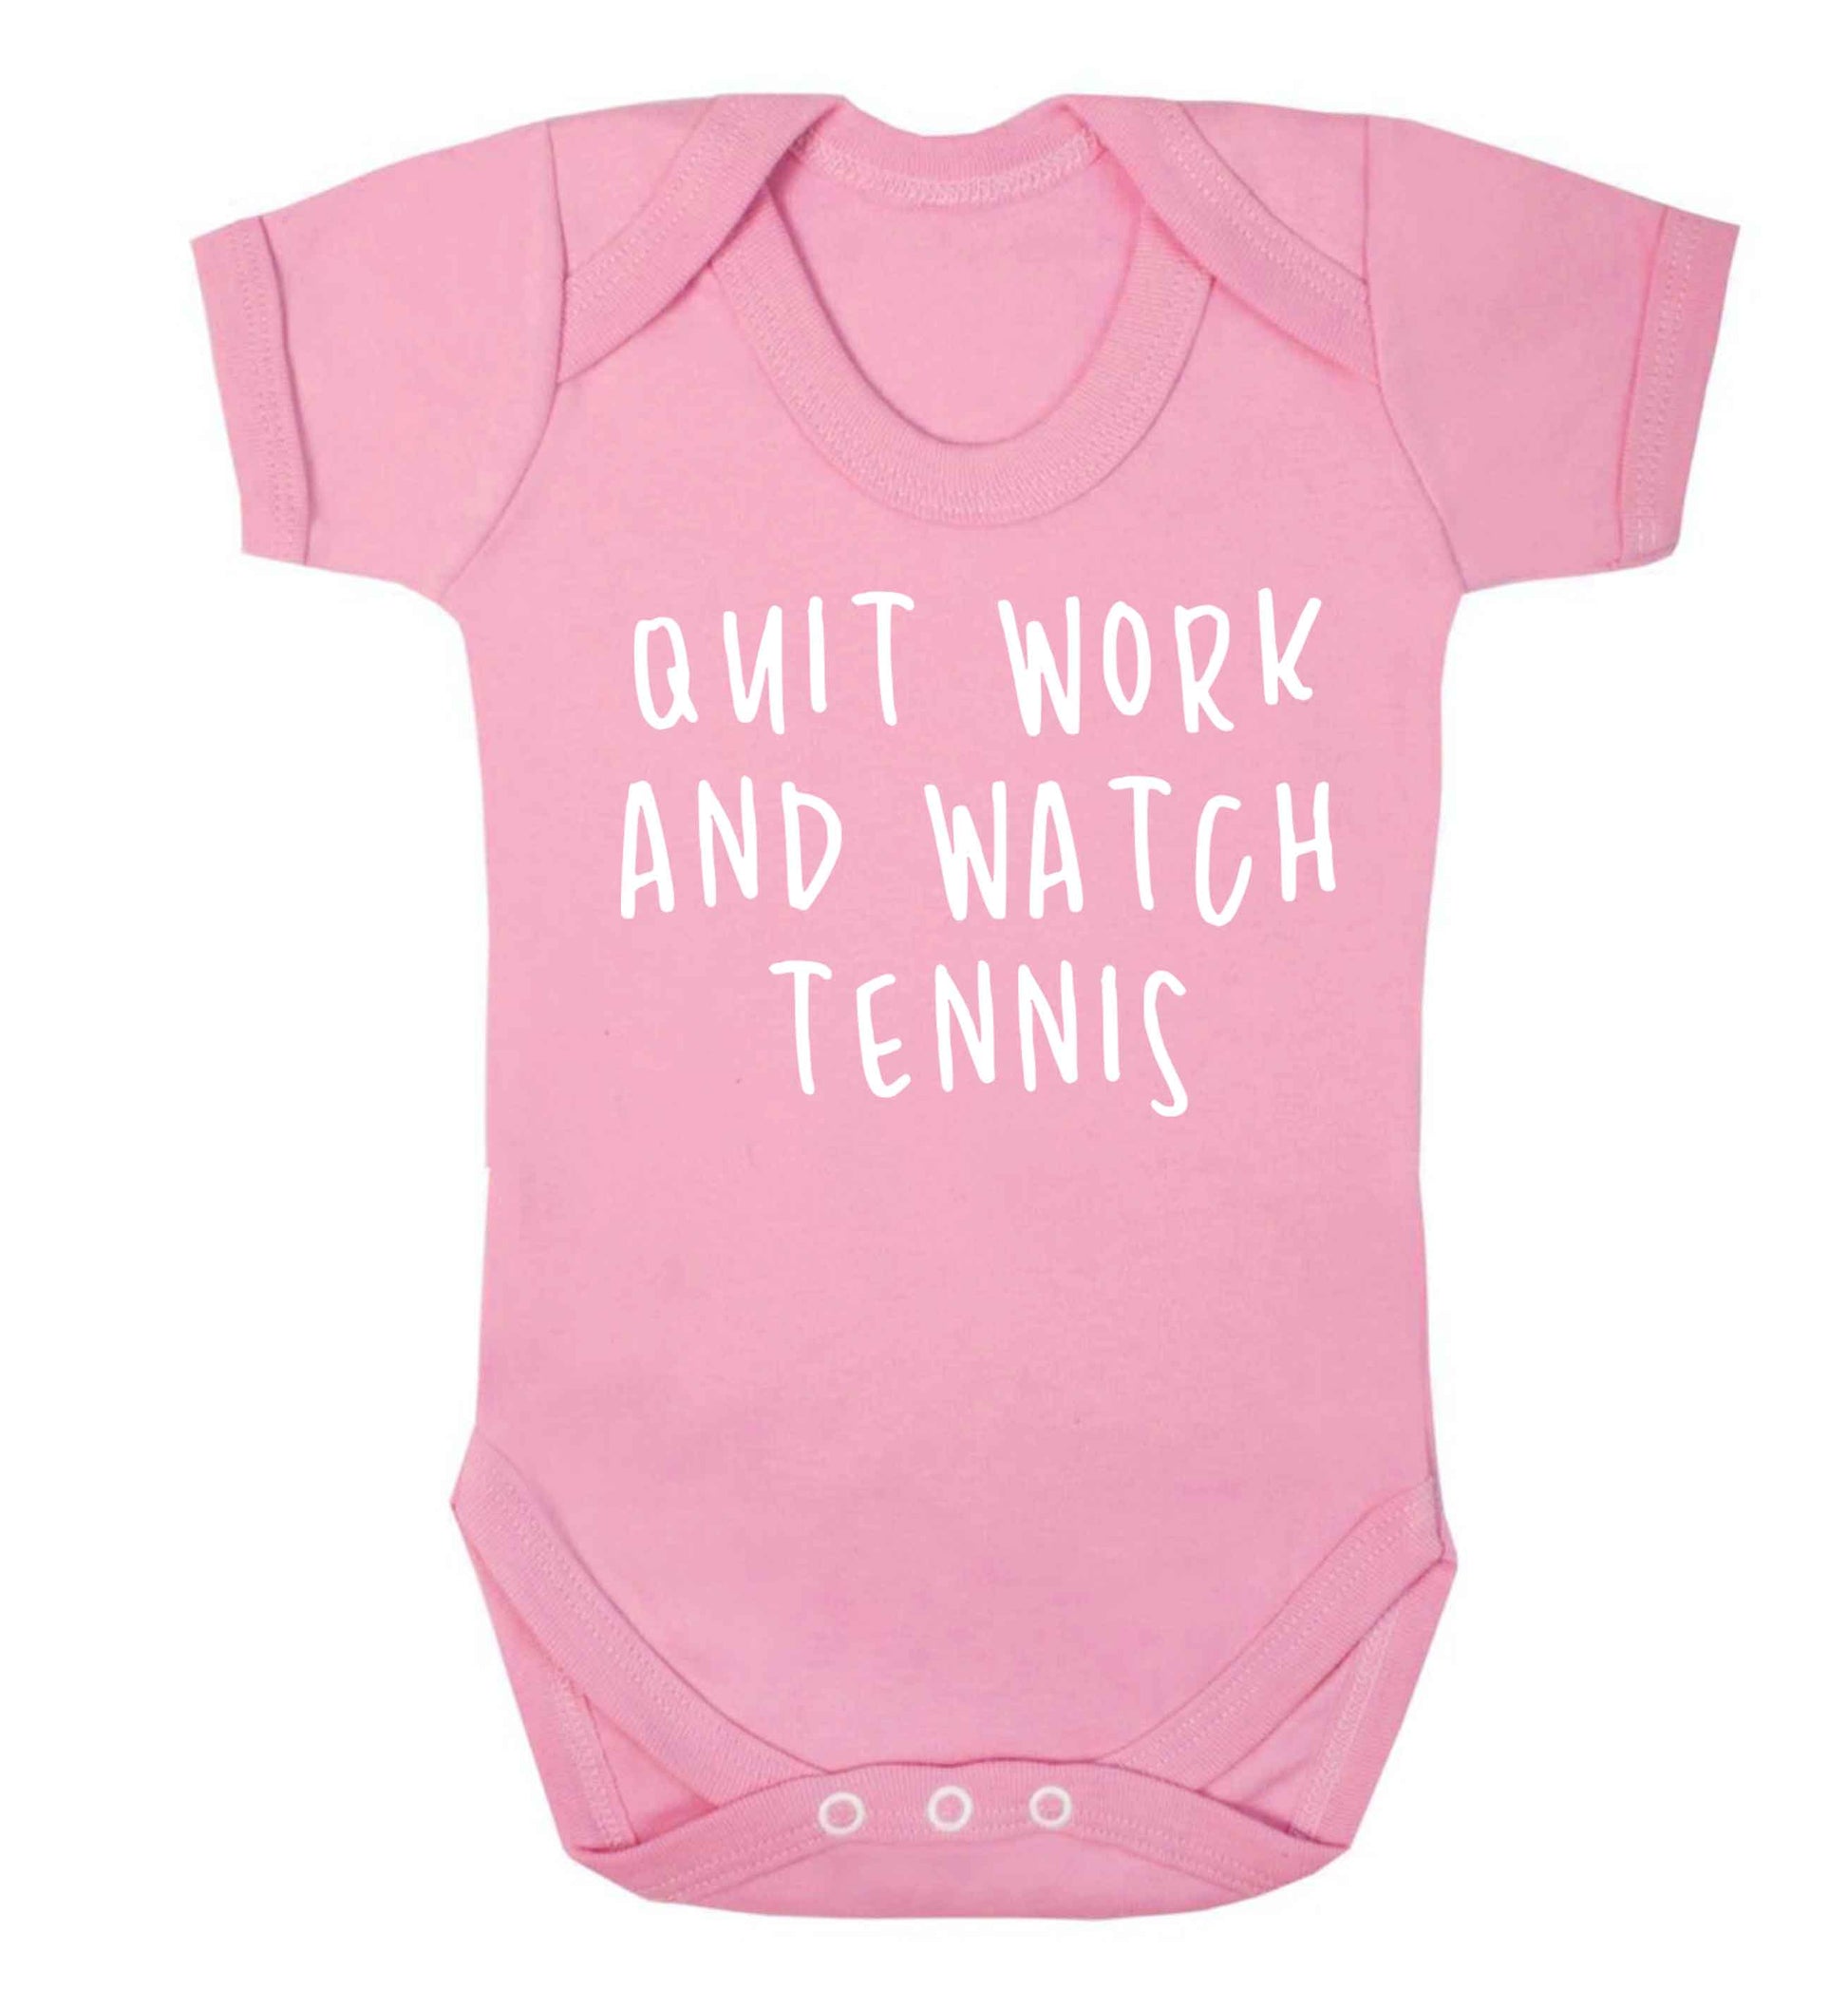 Quit work and watch tennis Baby Vest pale pink 18-24 months